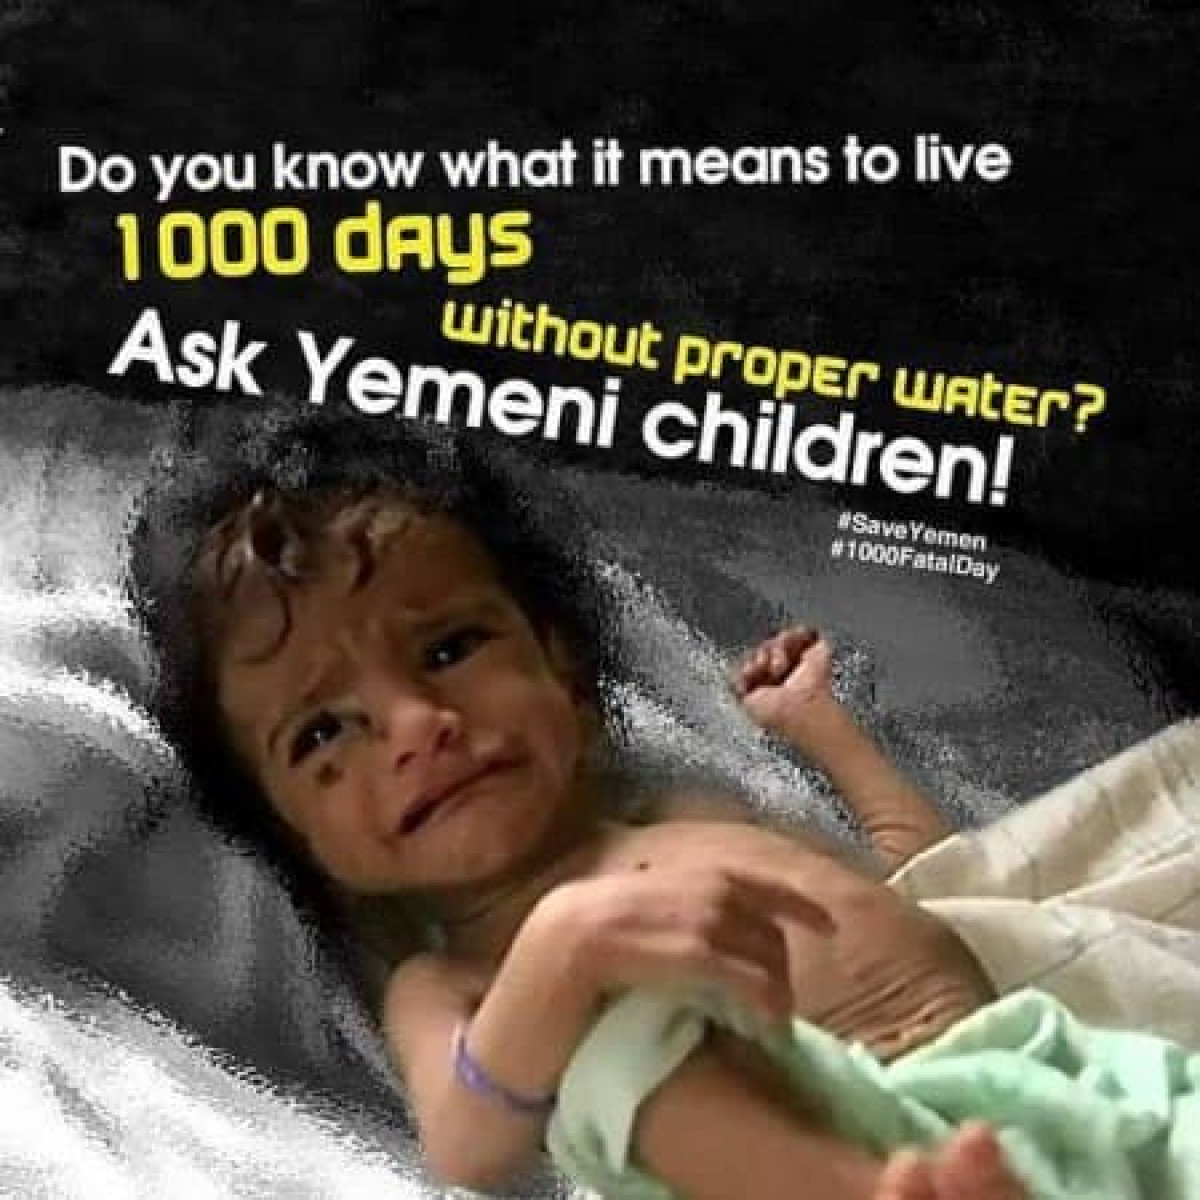 Where is sympathy & and empathy for the children of Yemen? Where is Humanity